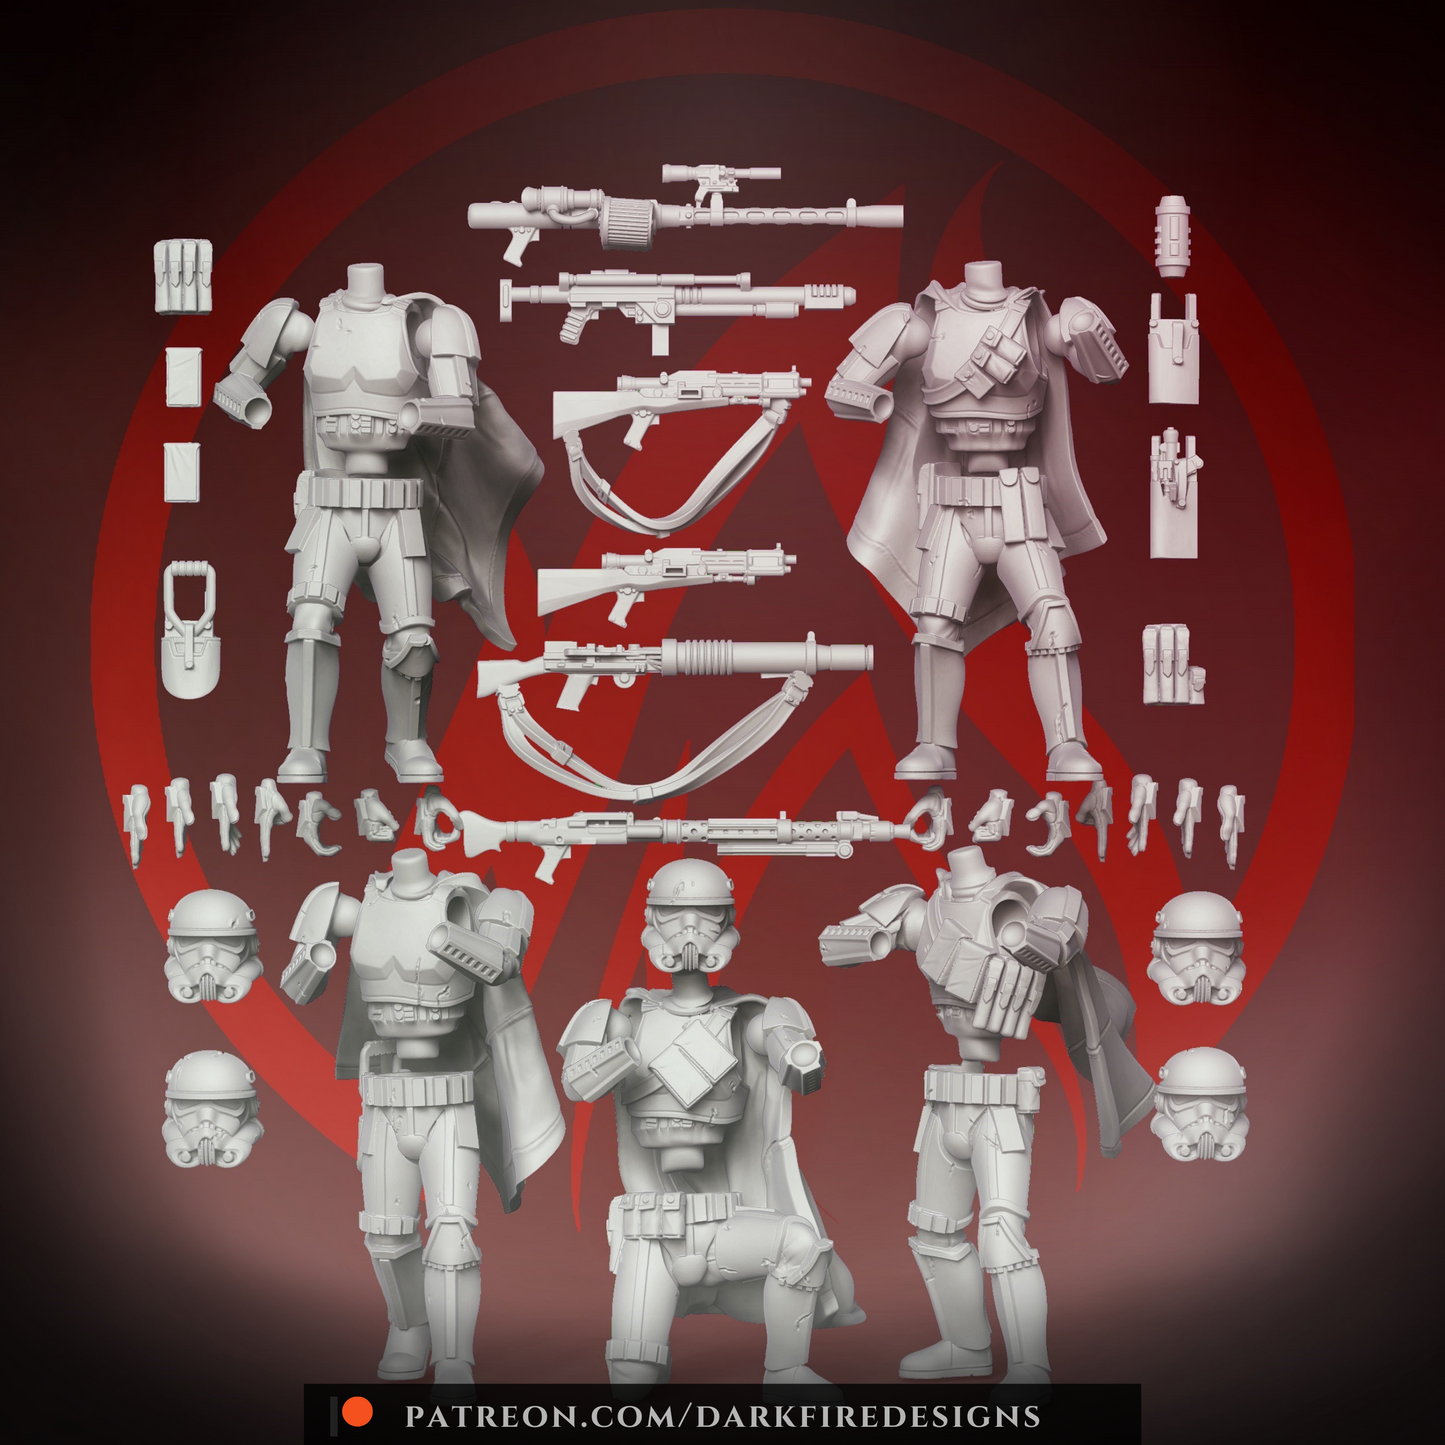 Imperial Heavy Trench Trooper Squad